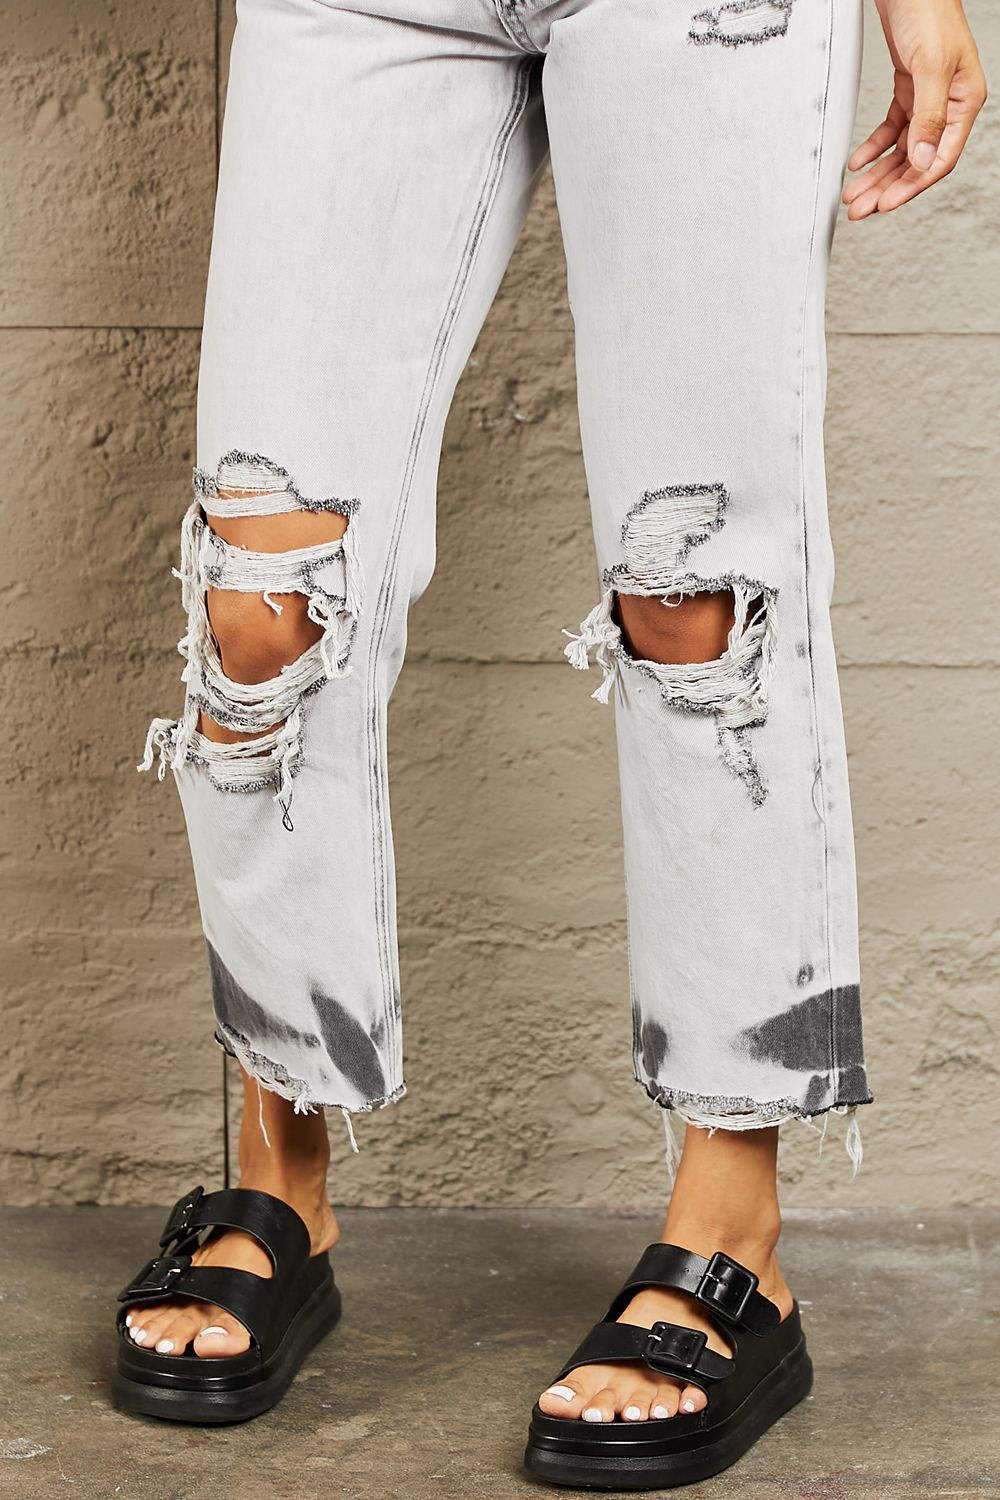 BAYEAS Acid Wash Accent Cropped Mom Jeans | us.meeeshop